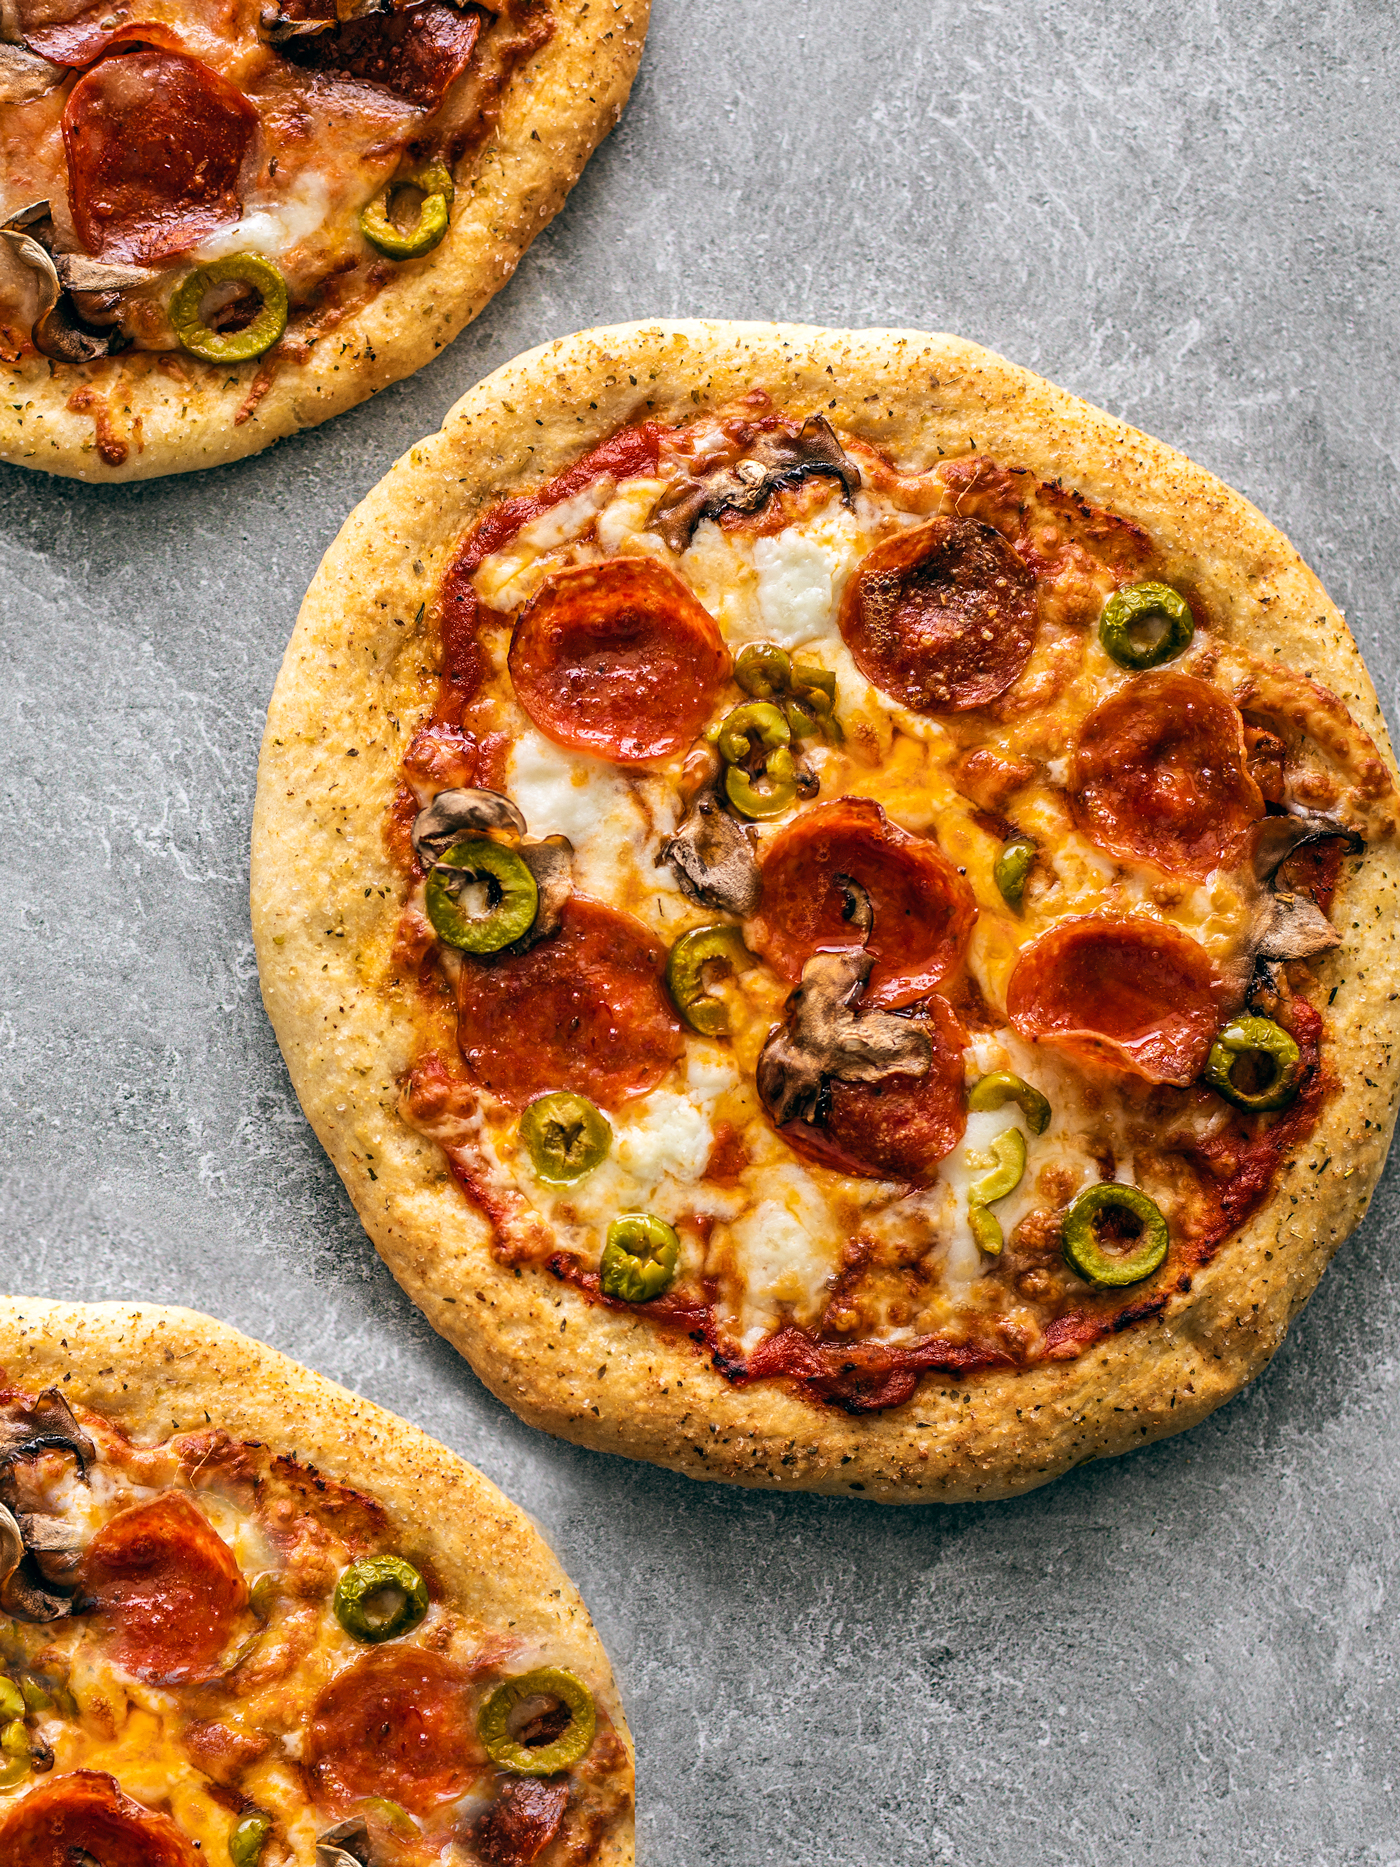 Golden pizzas topped with melted cheese, pepperoni, olives, and mushrooms.